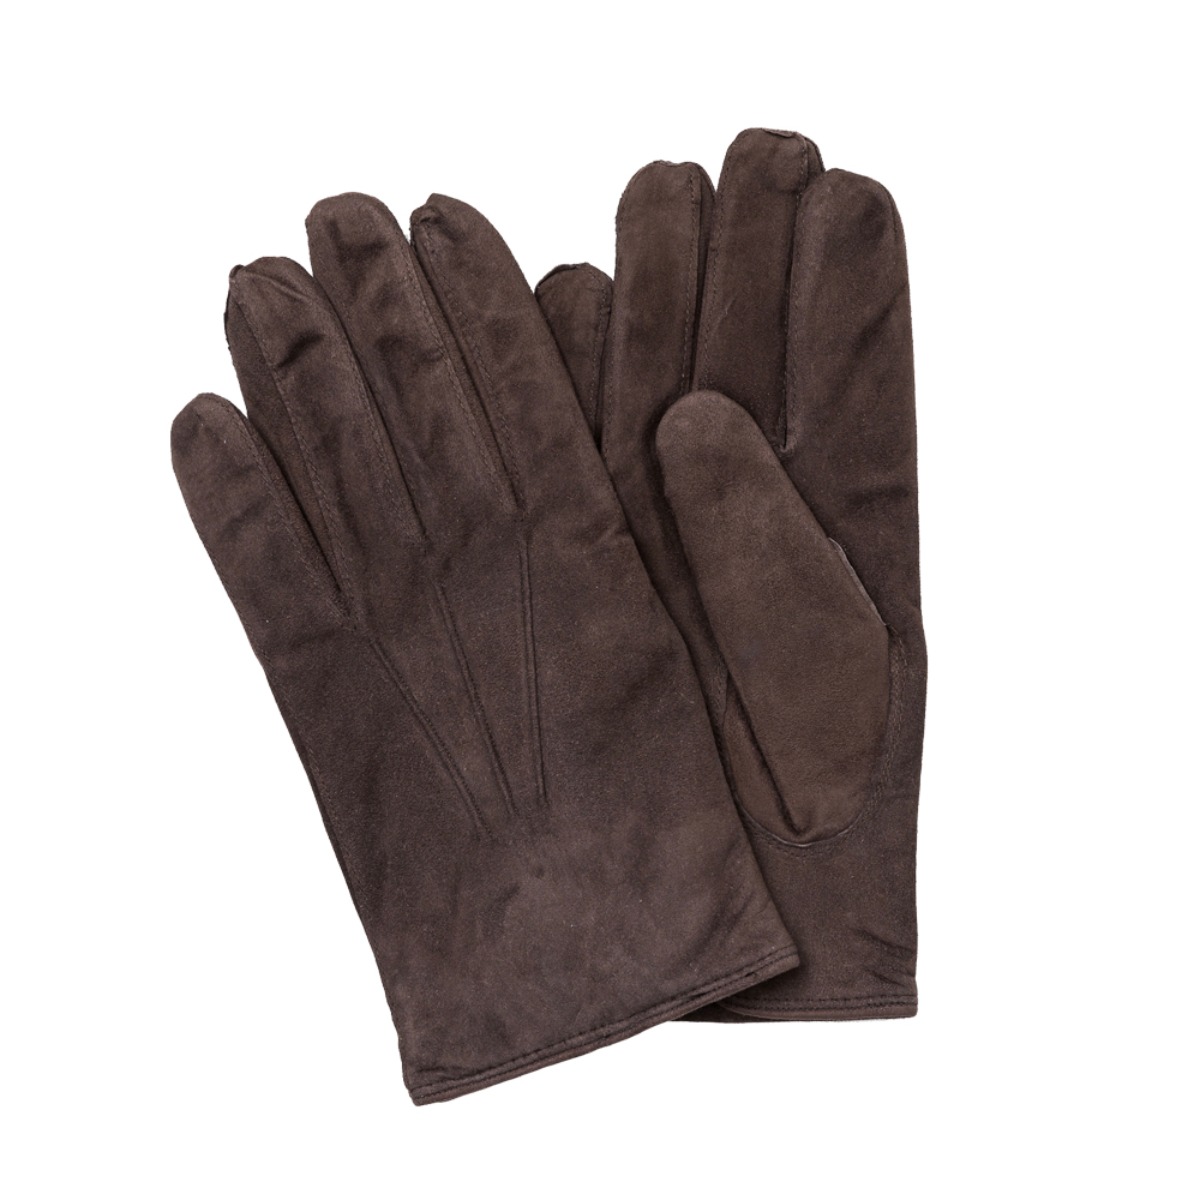 OMEGA GLOVES SUEDE NAPPA LEATHER GLOVES CHOCO